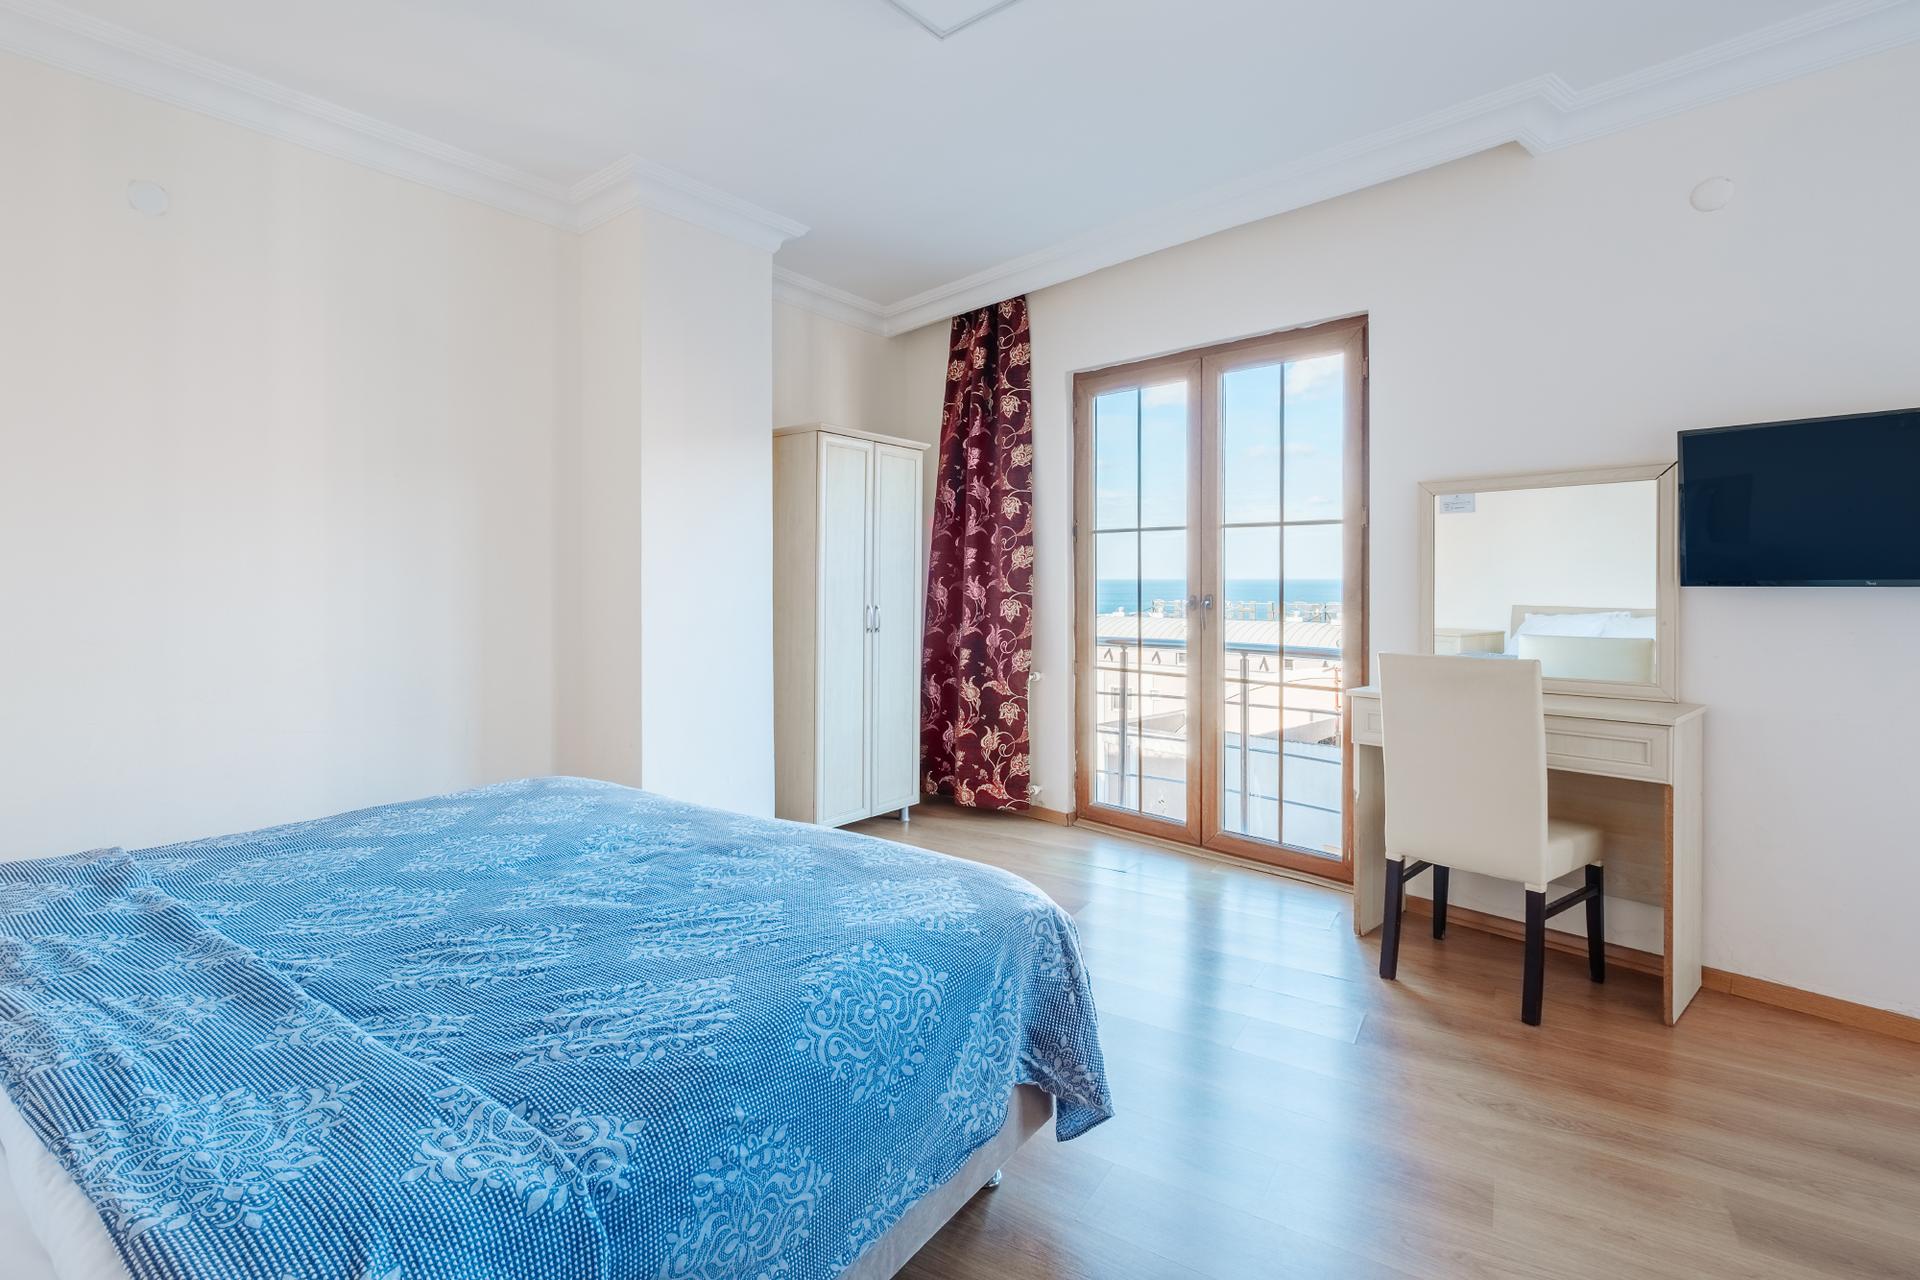 Wake up to the serene beauty of endless blue waters from the comfort of your luxurious sea view room.